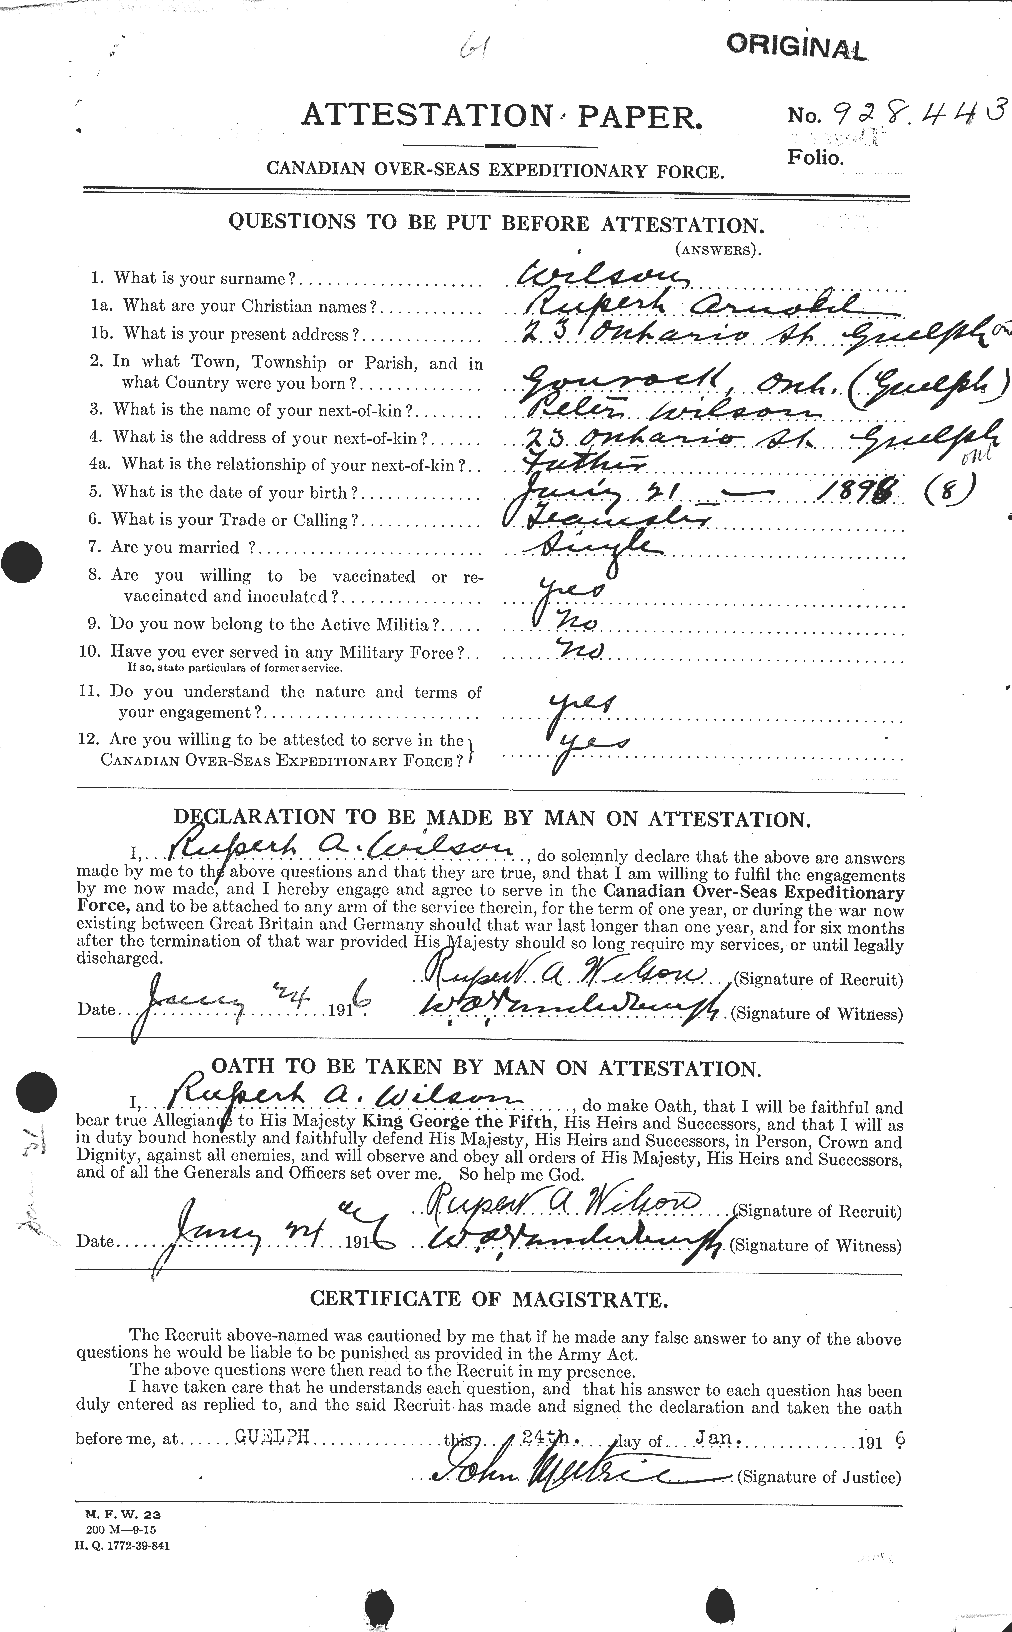 Personnel Records of the First World War - CEF 681072a